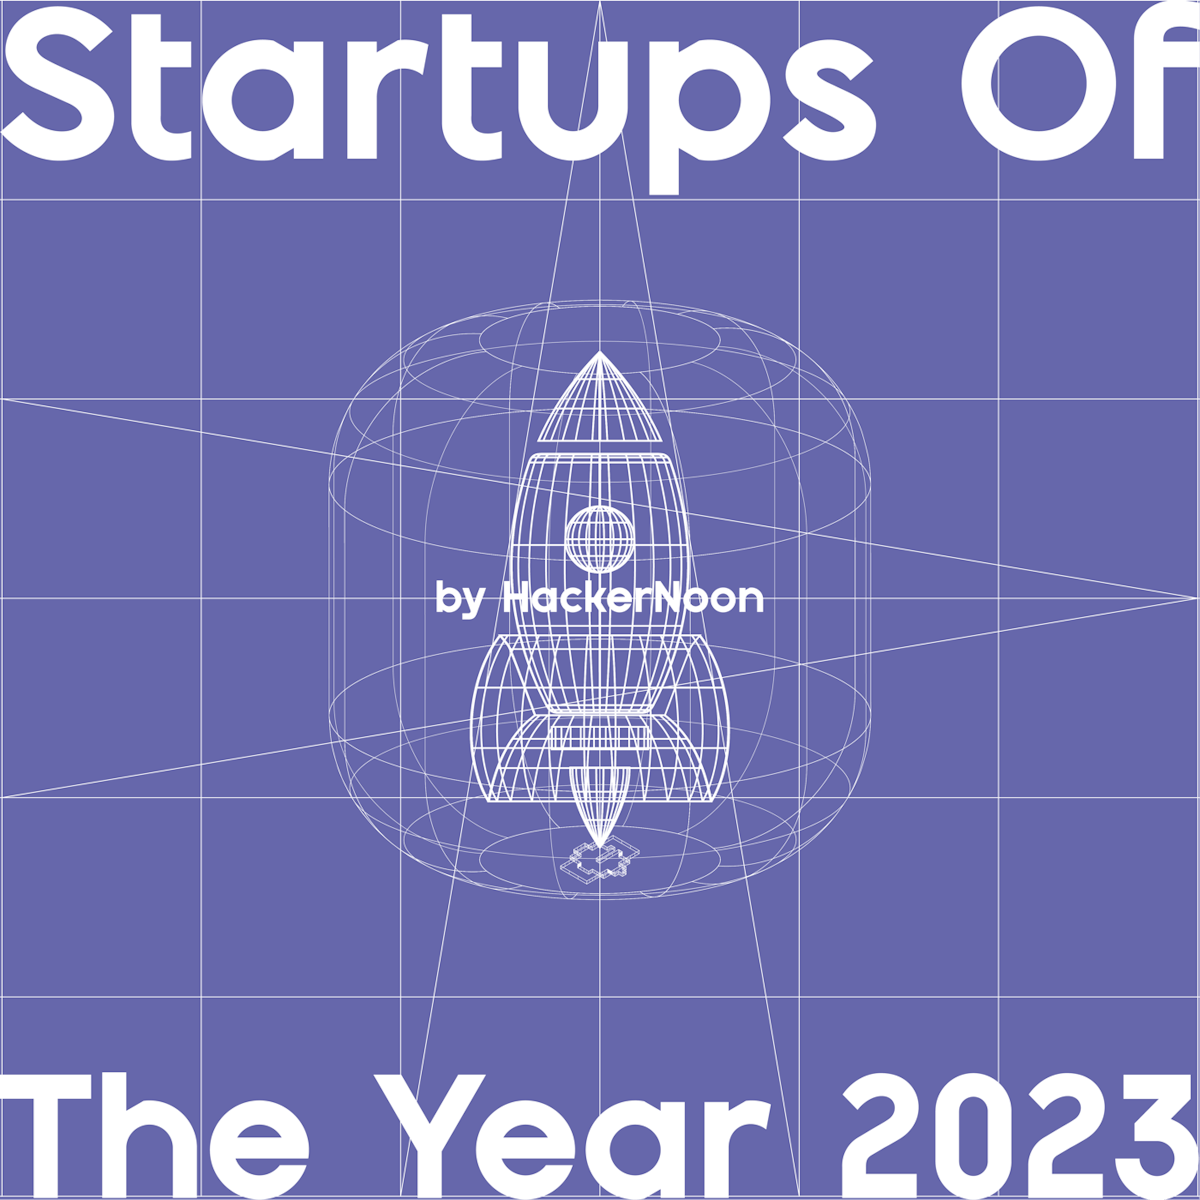 featured image - Startups of The Year 2023: Cybersecurity Startup Interview